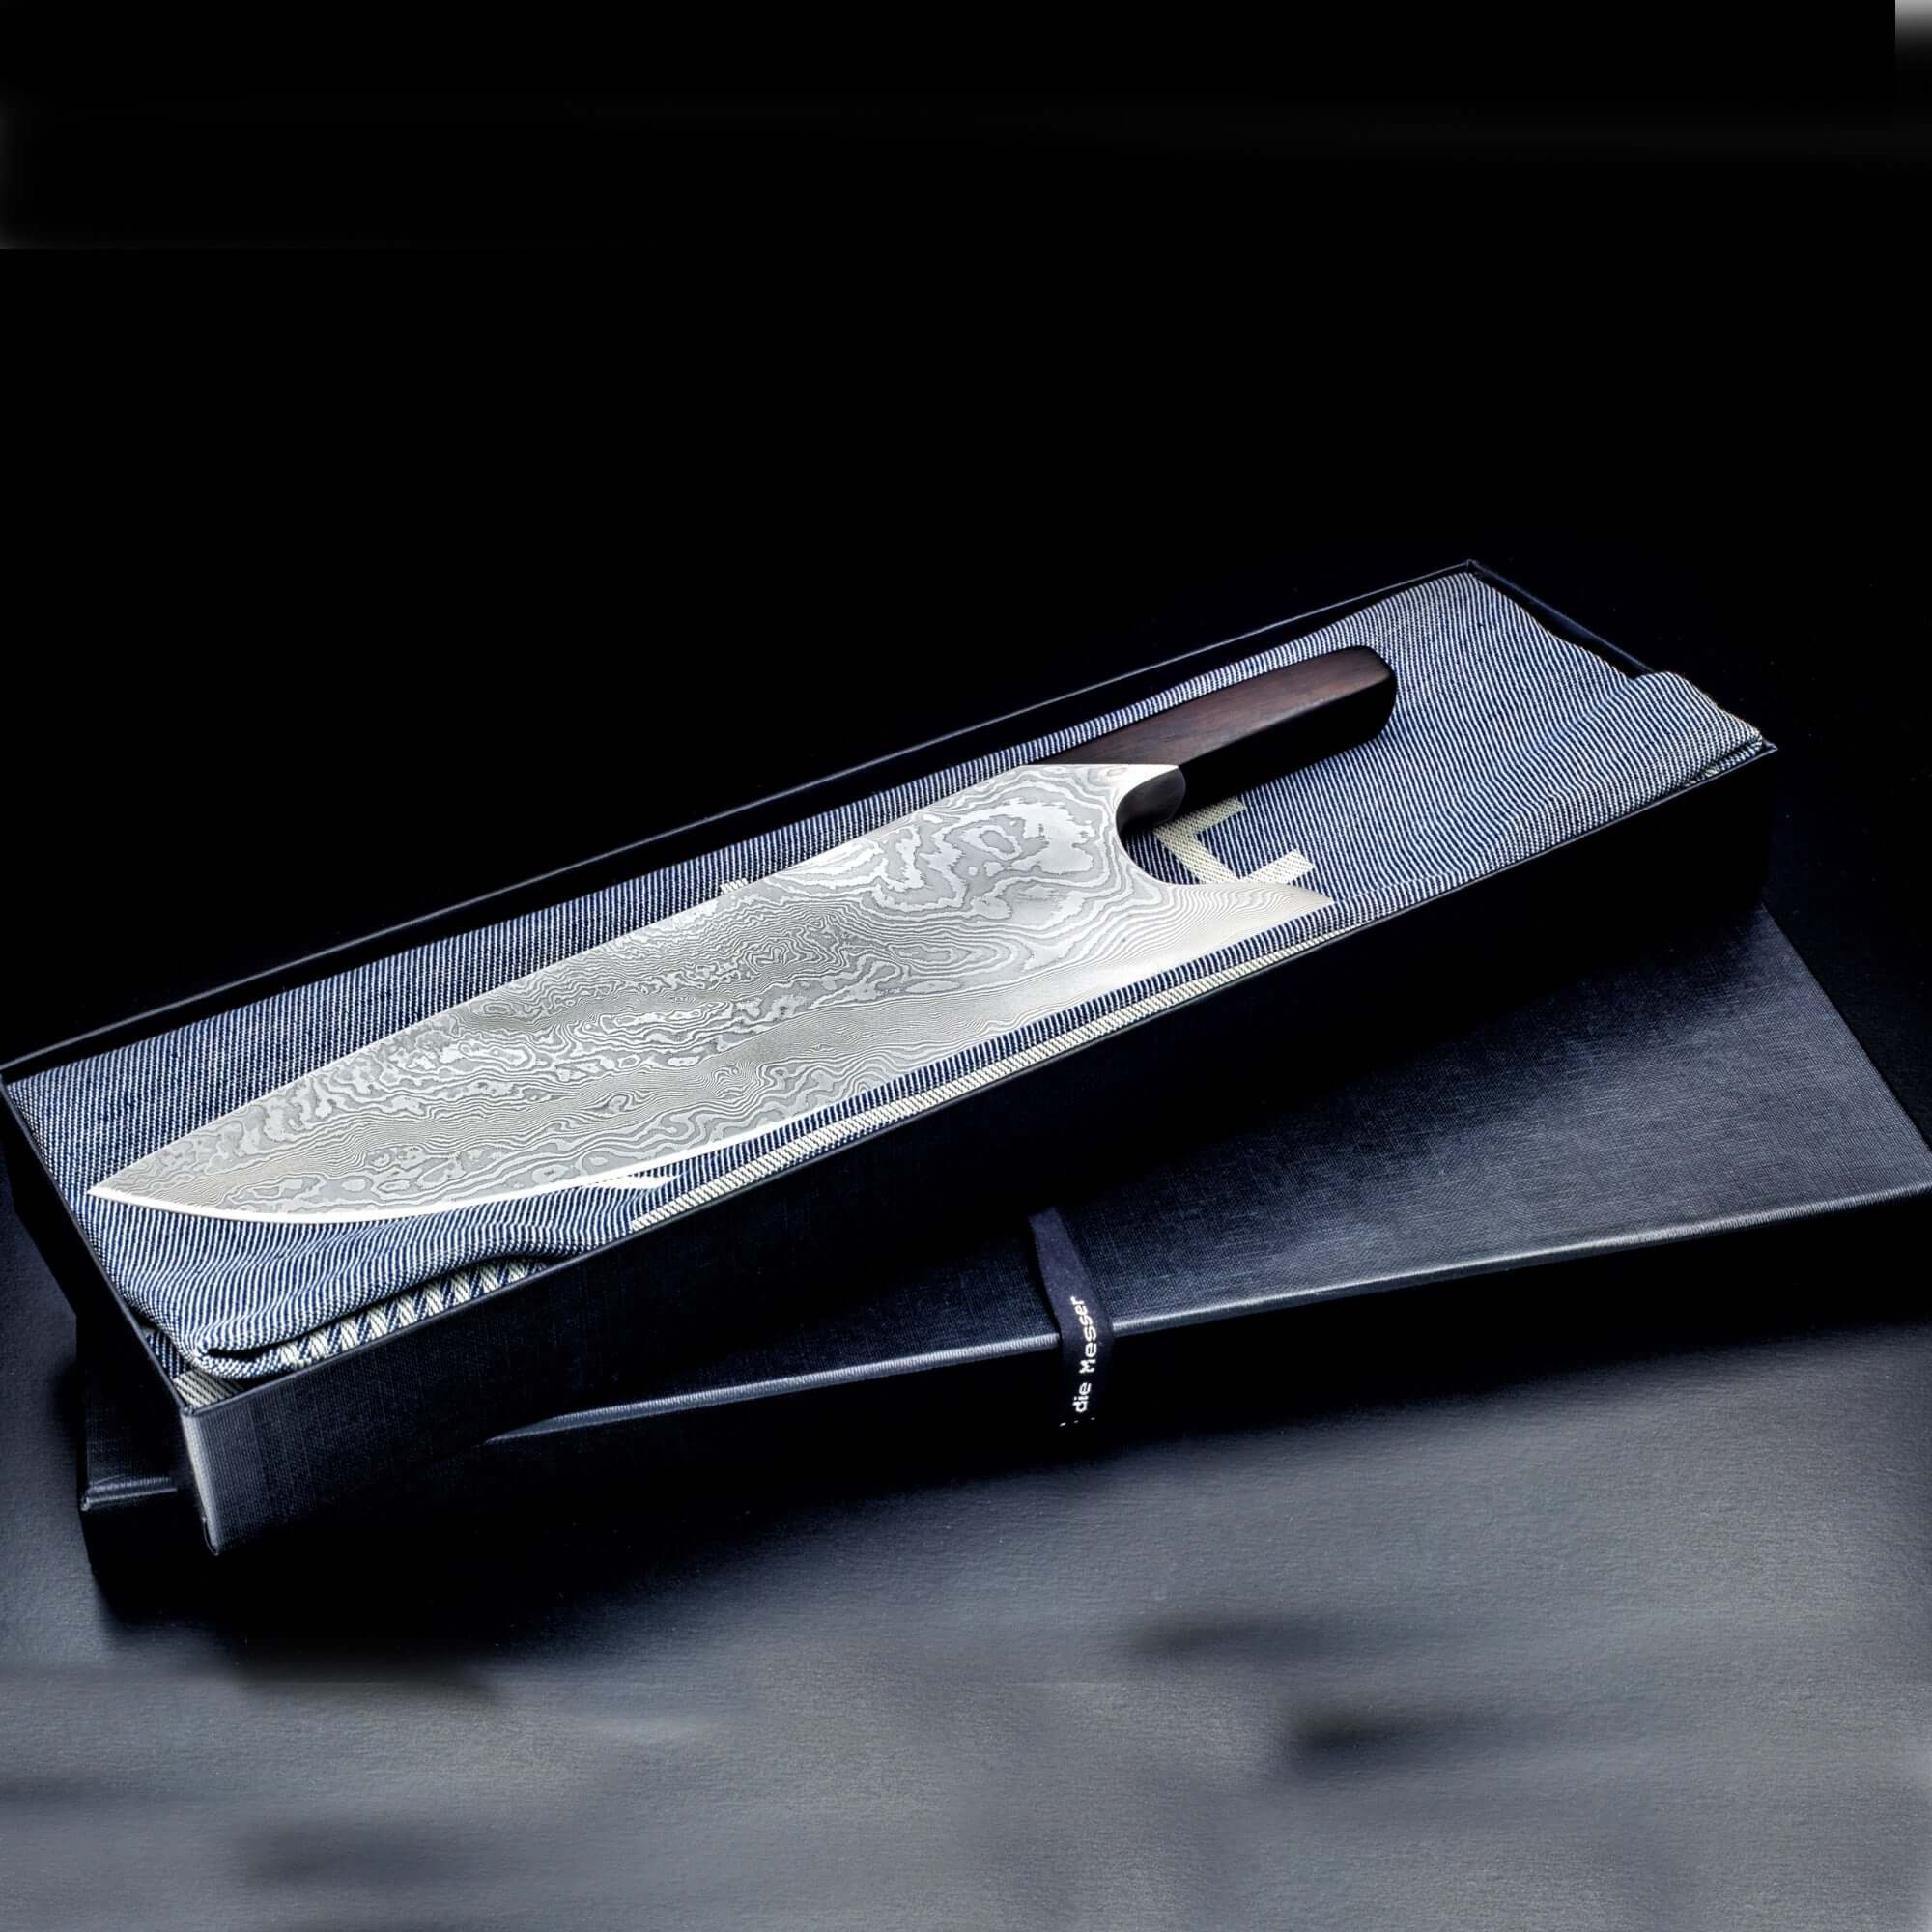 The Knife | Damascus Steel The Knife 26cm Blade